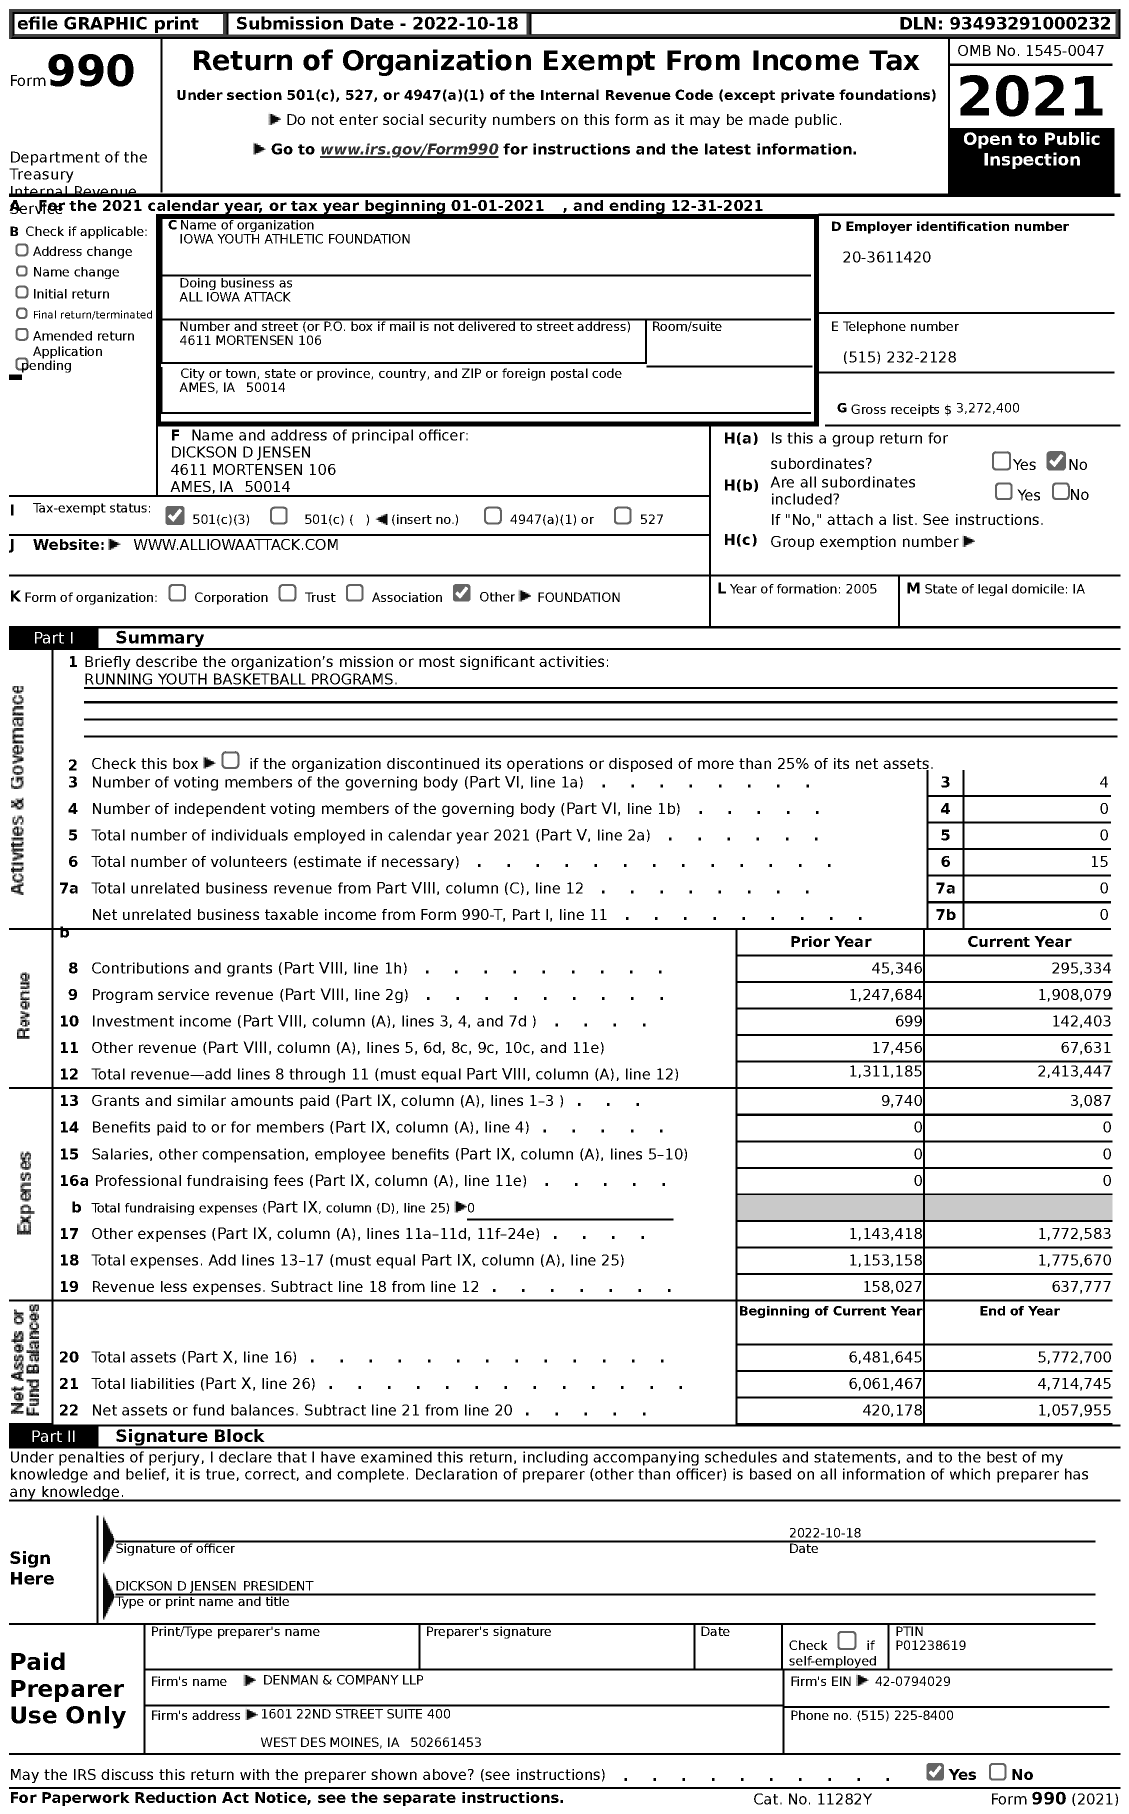 Image of first page of 2021 Form 990 for All Iowa Attack